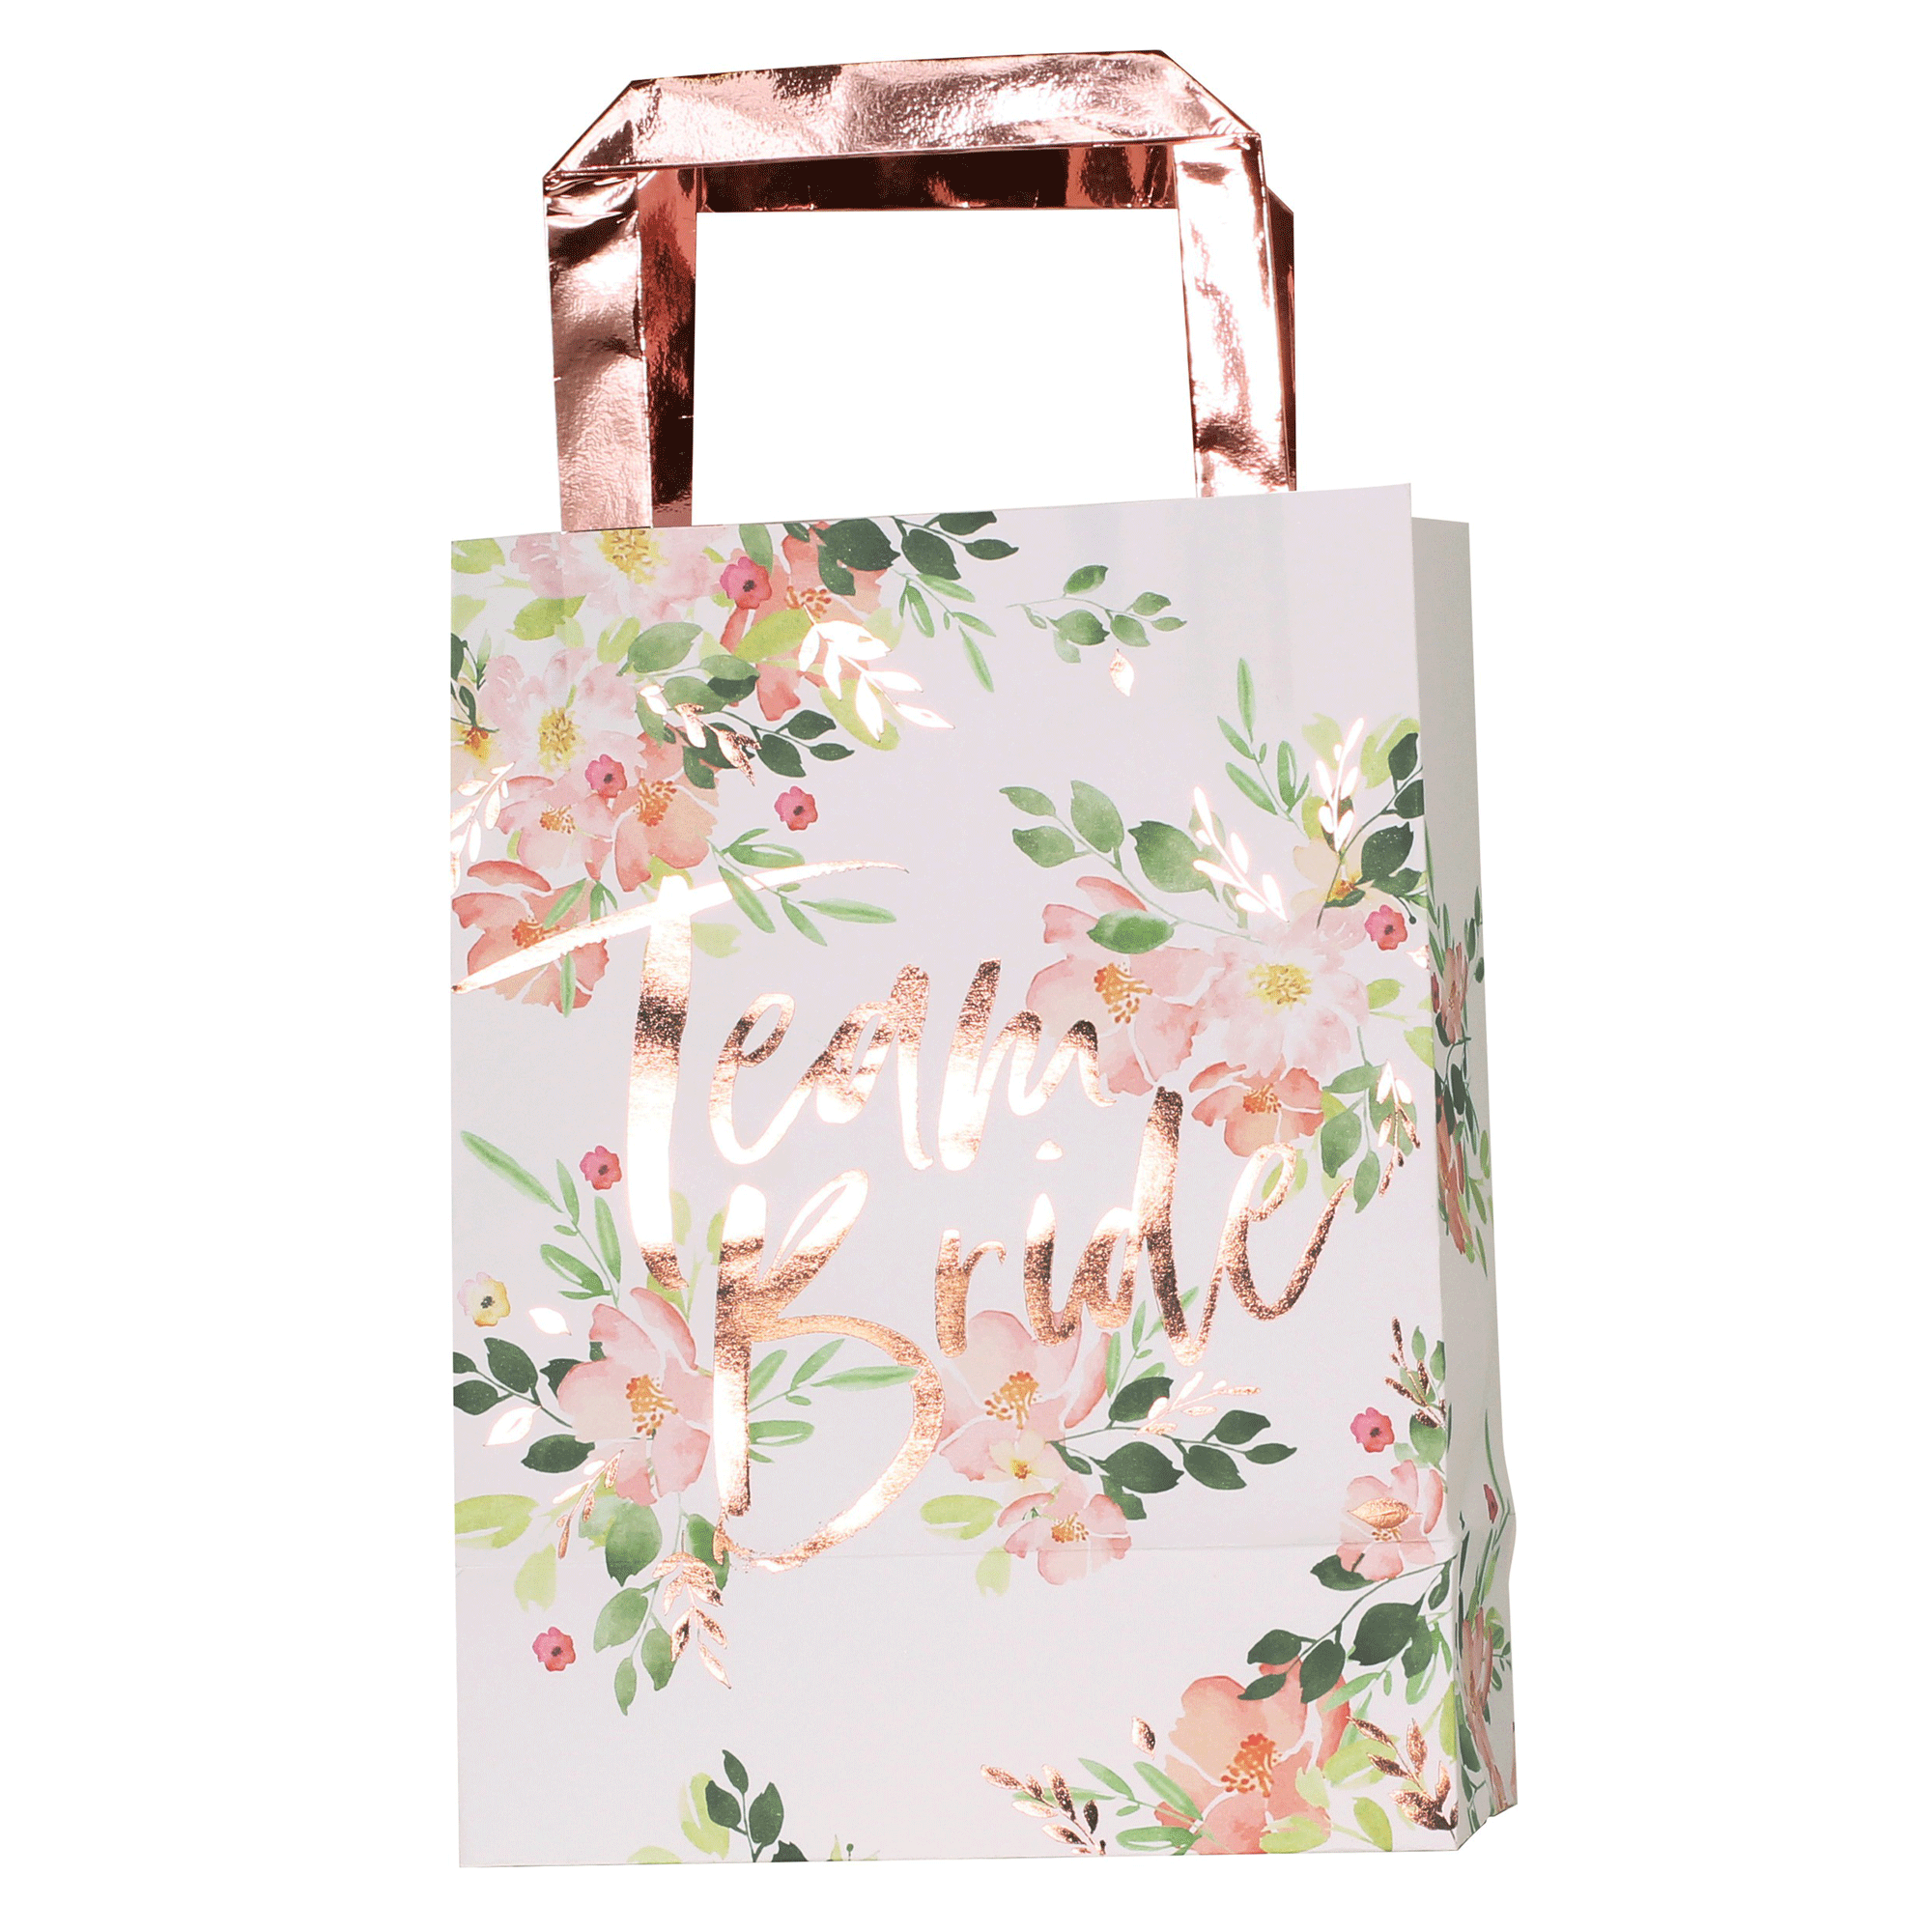 Team Bride Party Bags Floral Rose Gold (Pack of 5)